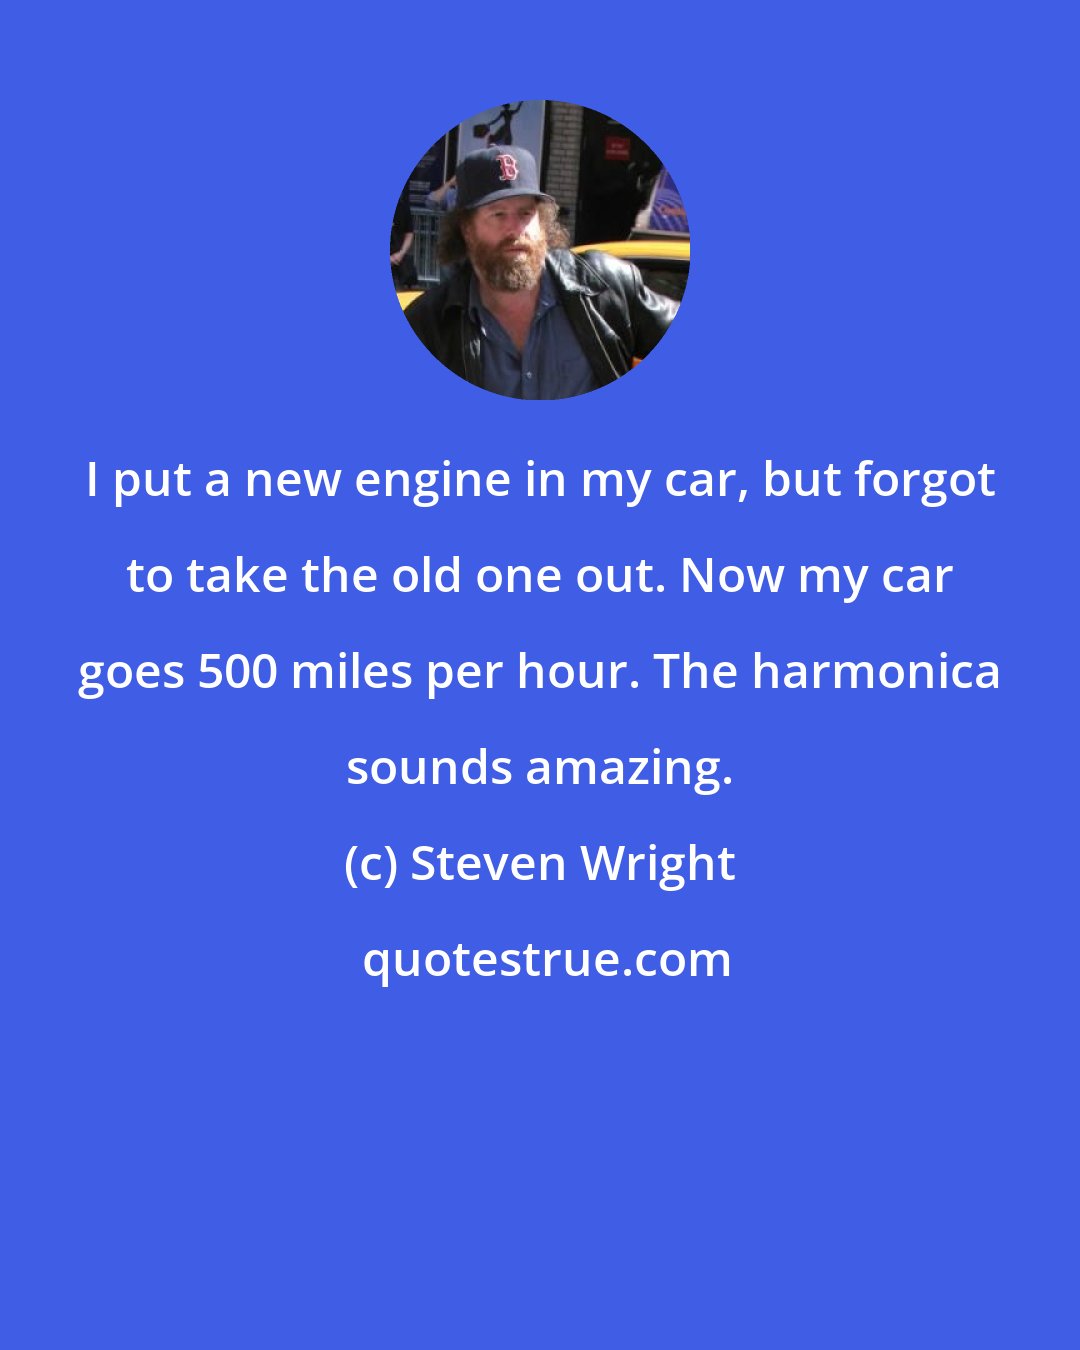 Steven Wright: I put a new engine in my car, but forgot to take the old one out. Now my car goes 500 miles per hour. The harmonica sounds amazing.